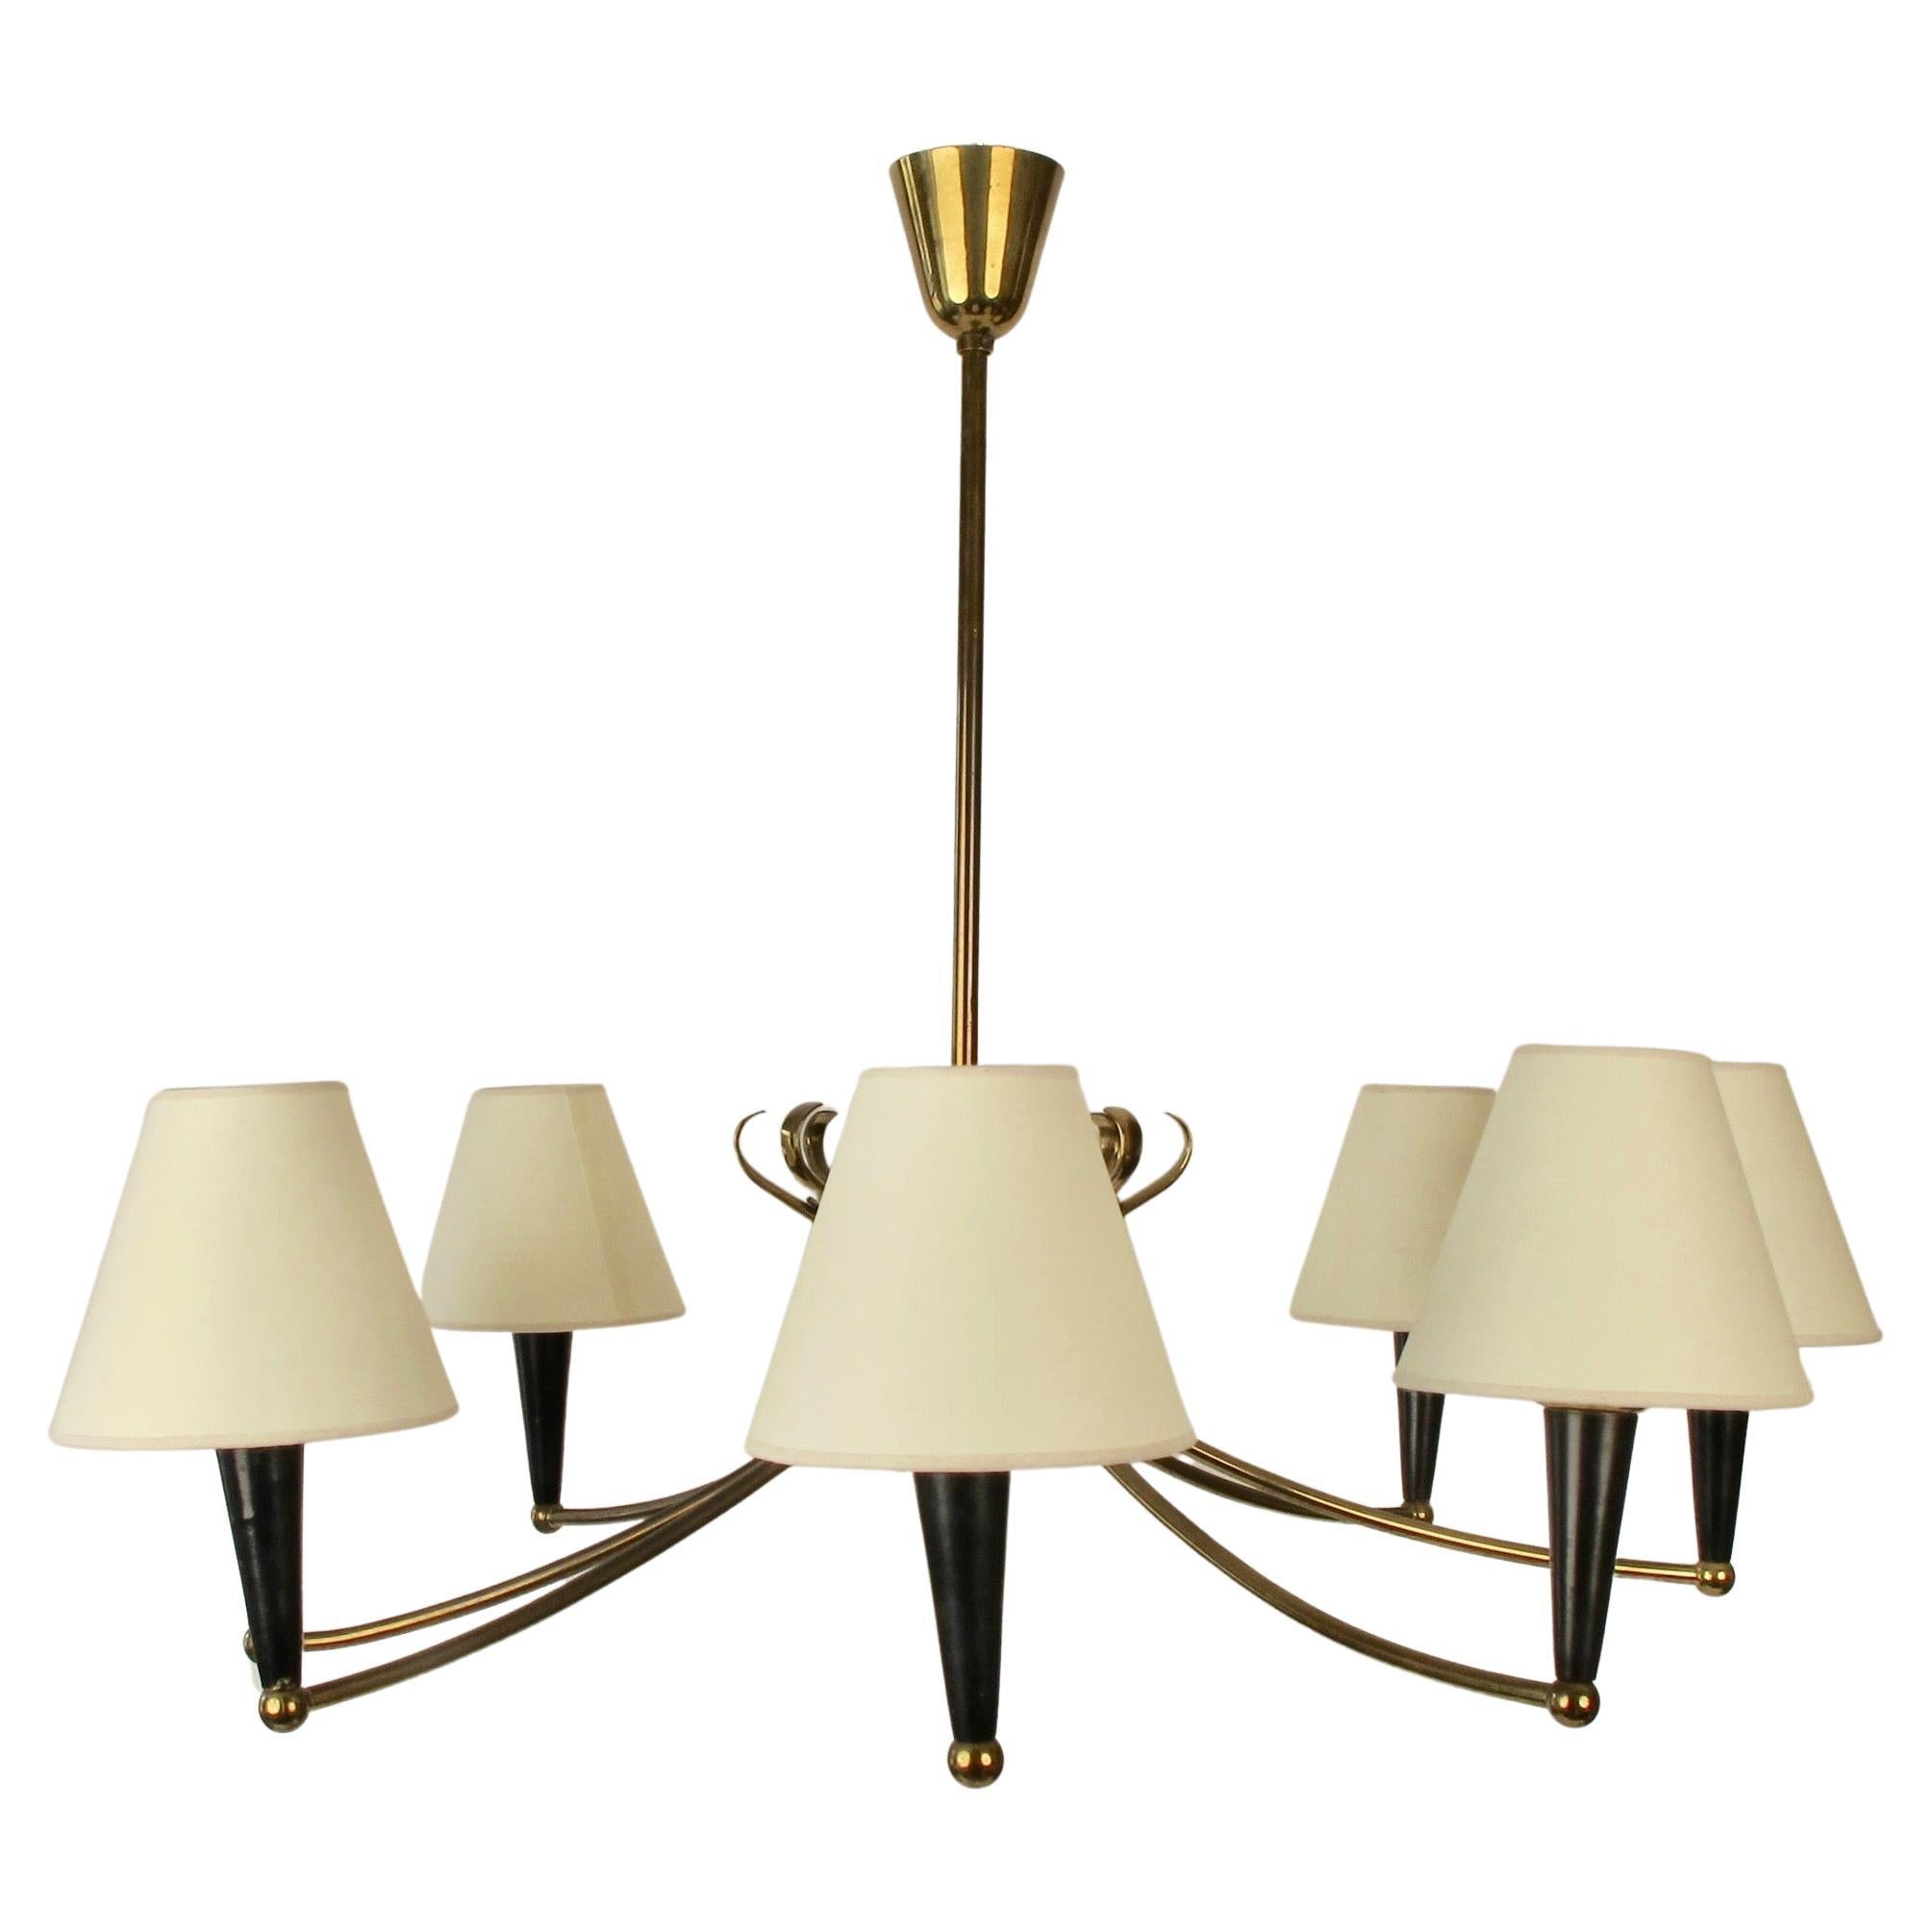 Modern Eight Arm Chandelier from Austria with Parchment Shades, 1950's